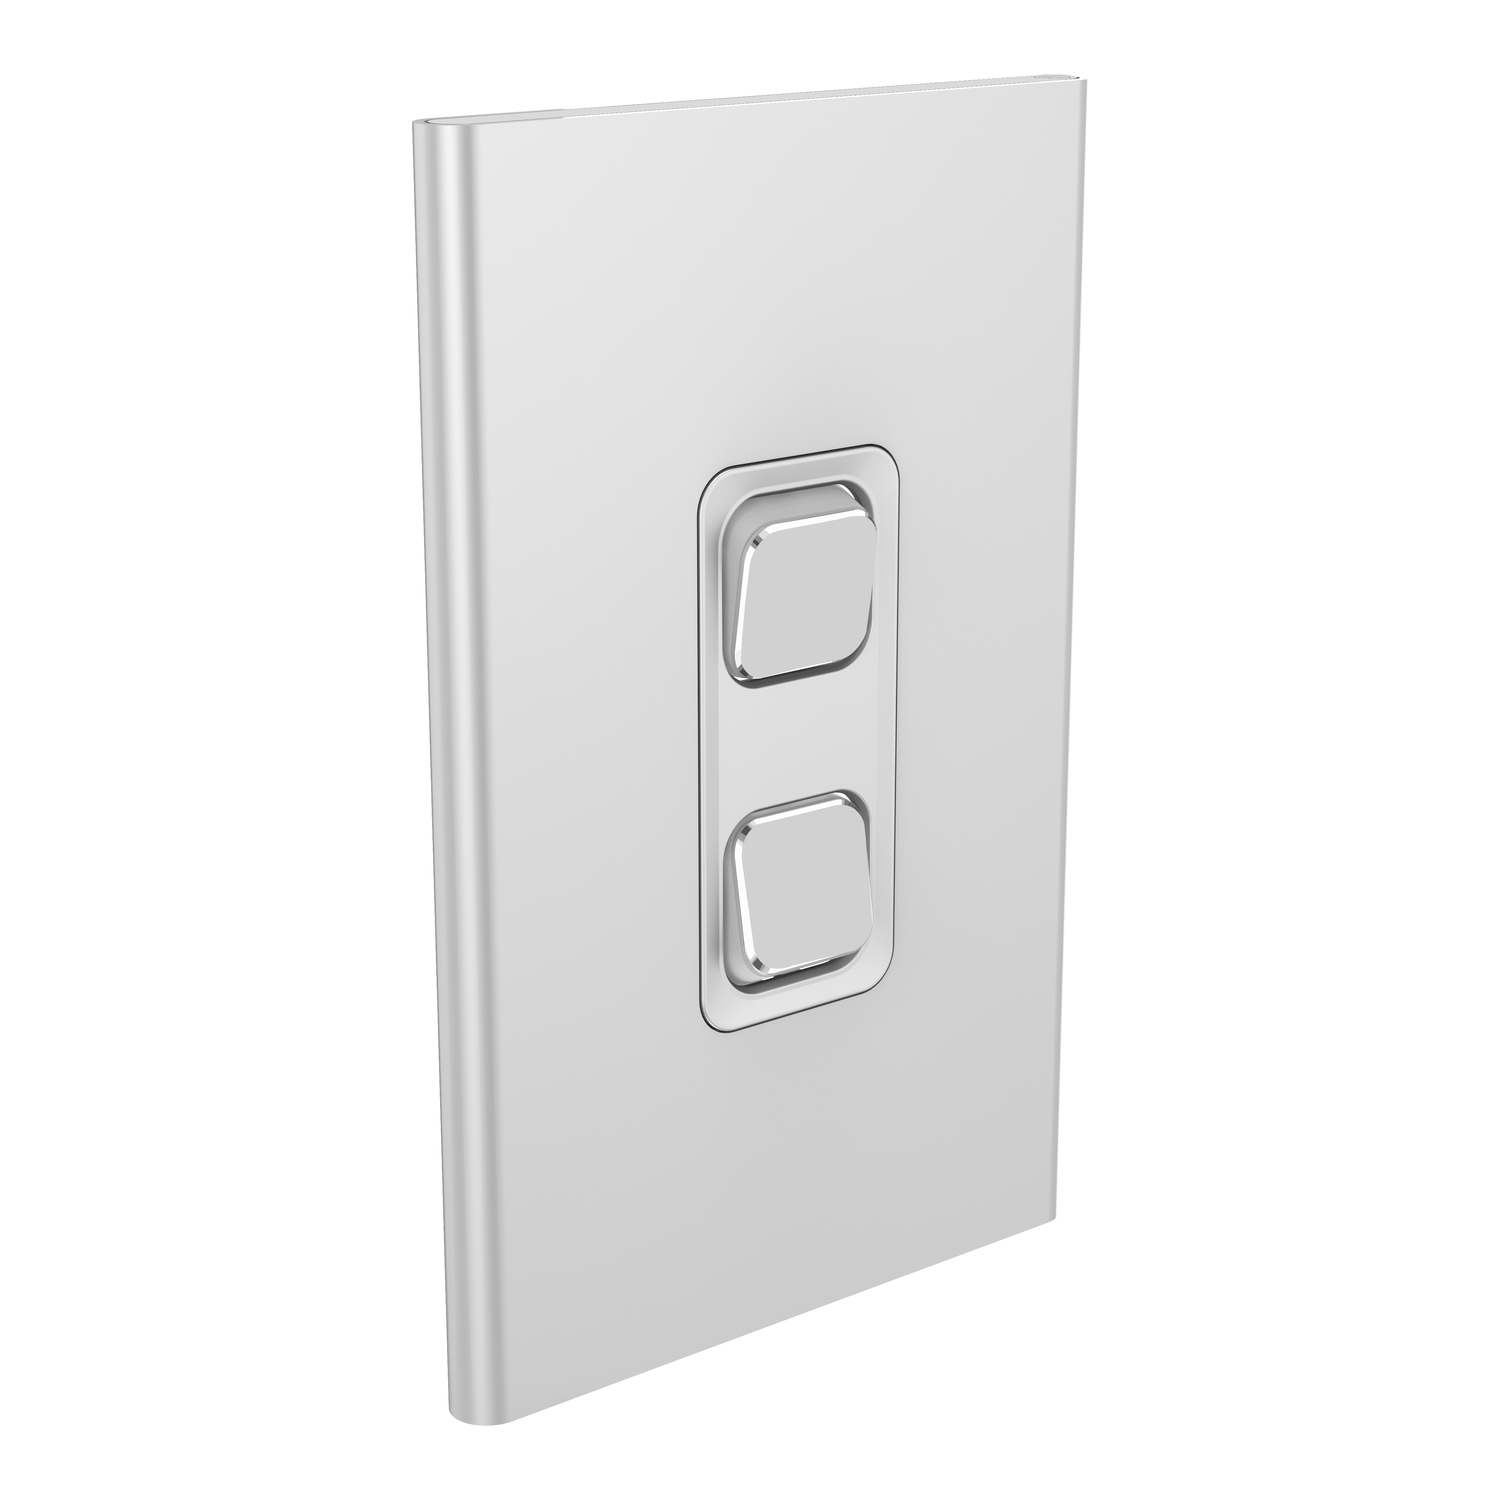 PDL Iconic Styl - Cover Plate Switch 2-Gang - Silver